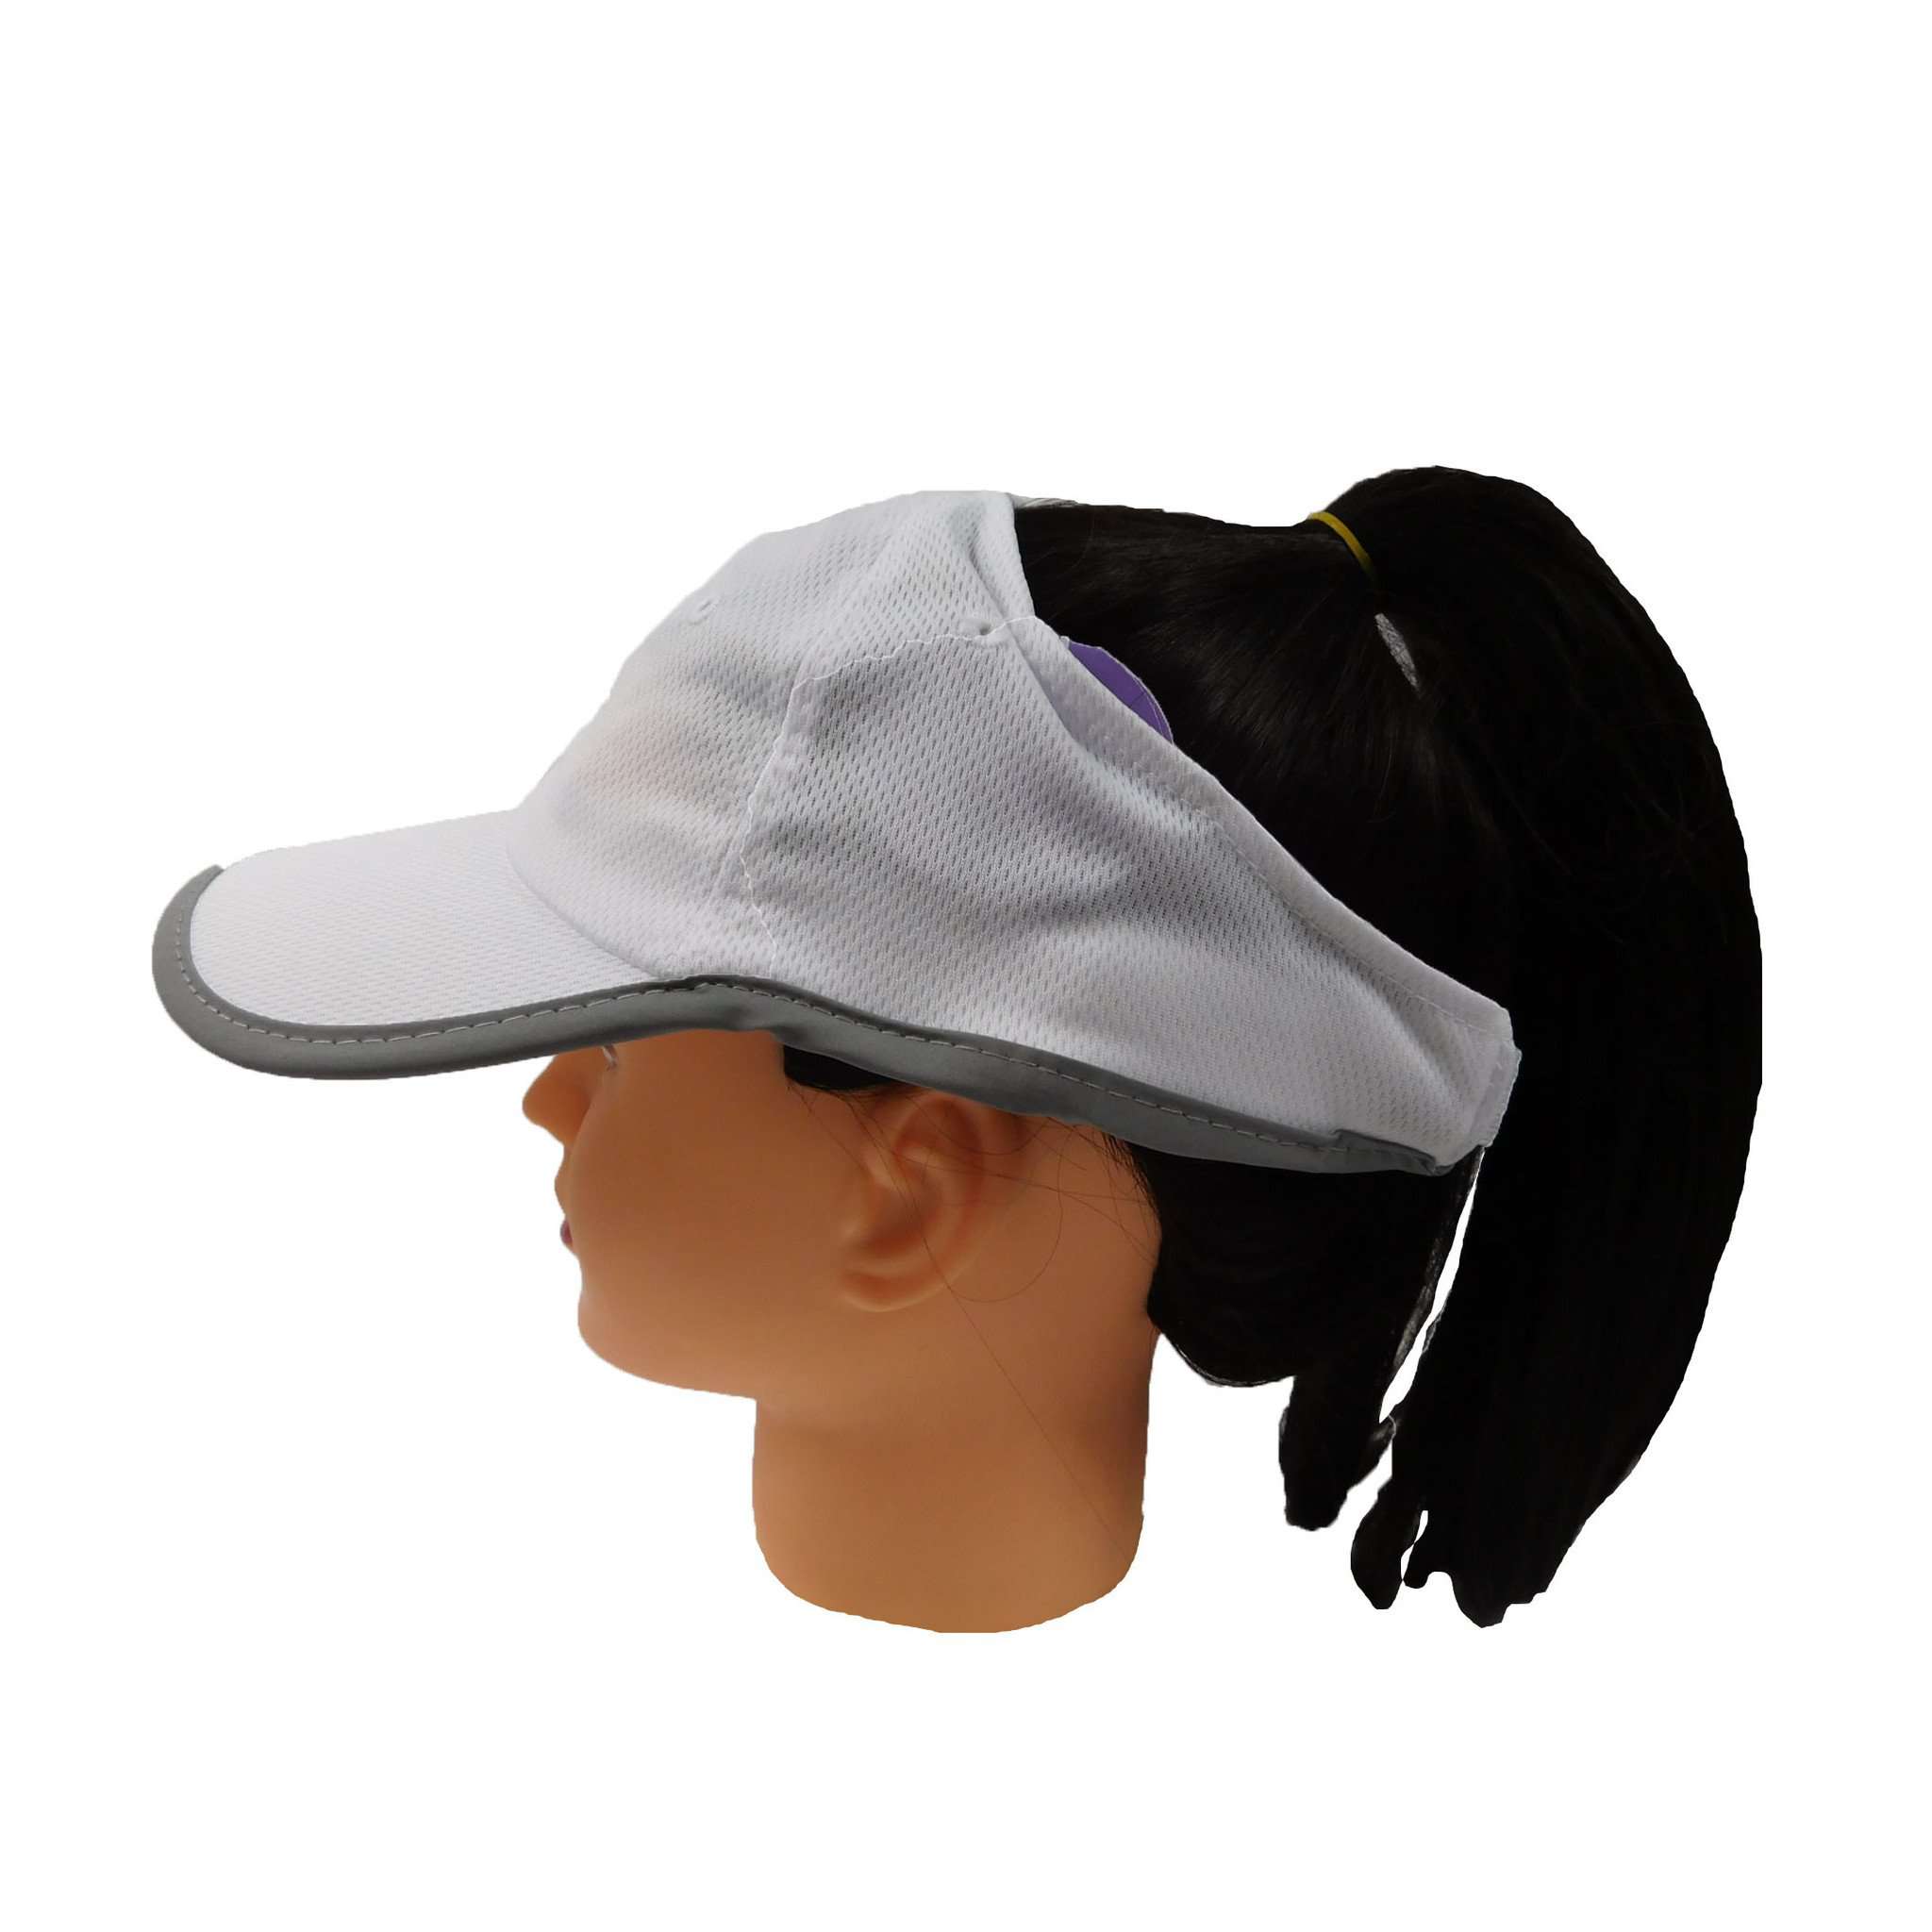 Ginnie Cap in Rayon Mesh with Golf Logo Cap Great hats by Karen Keith    